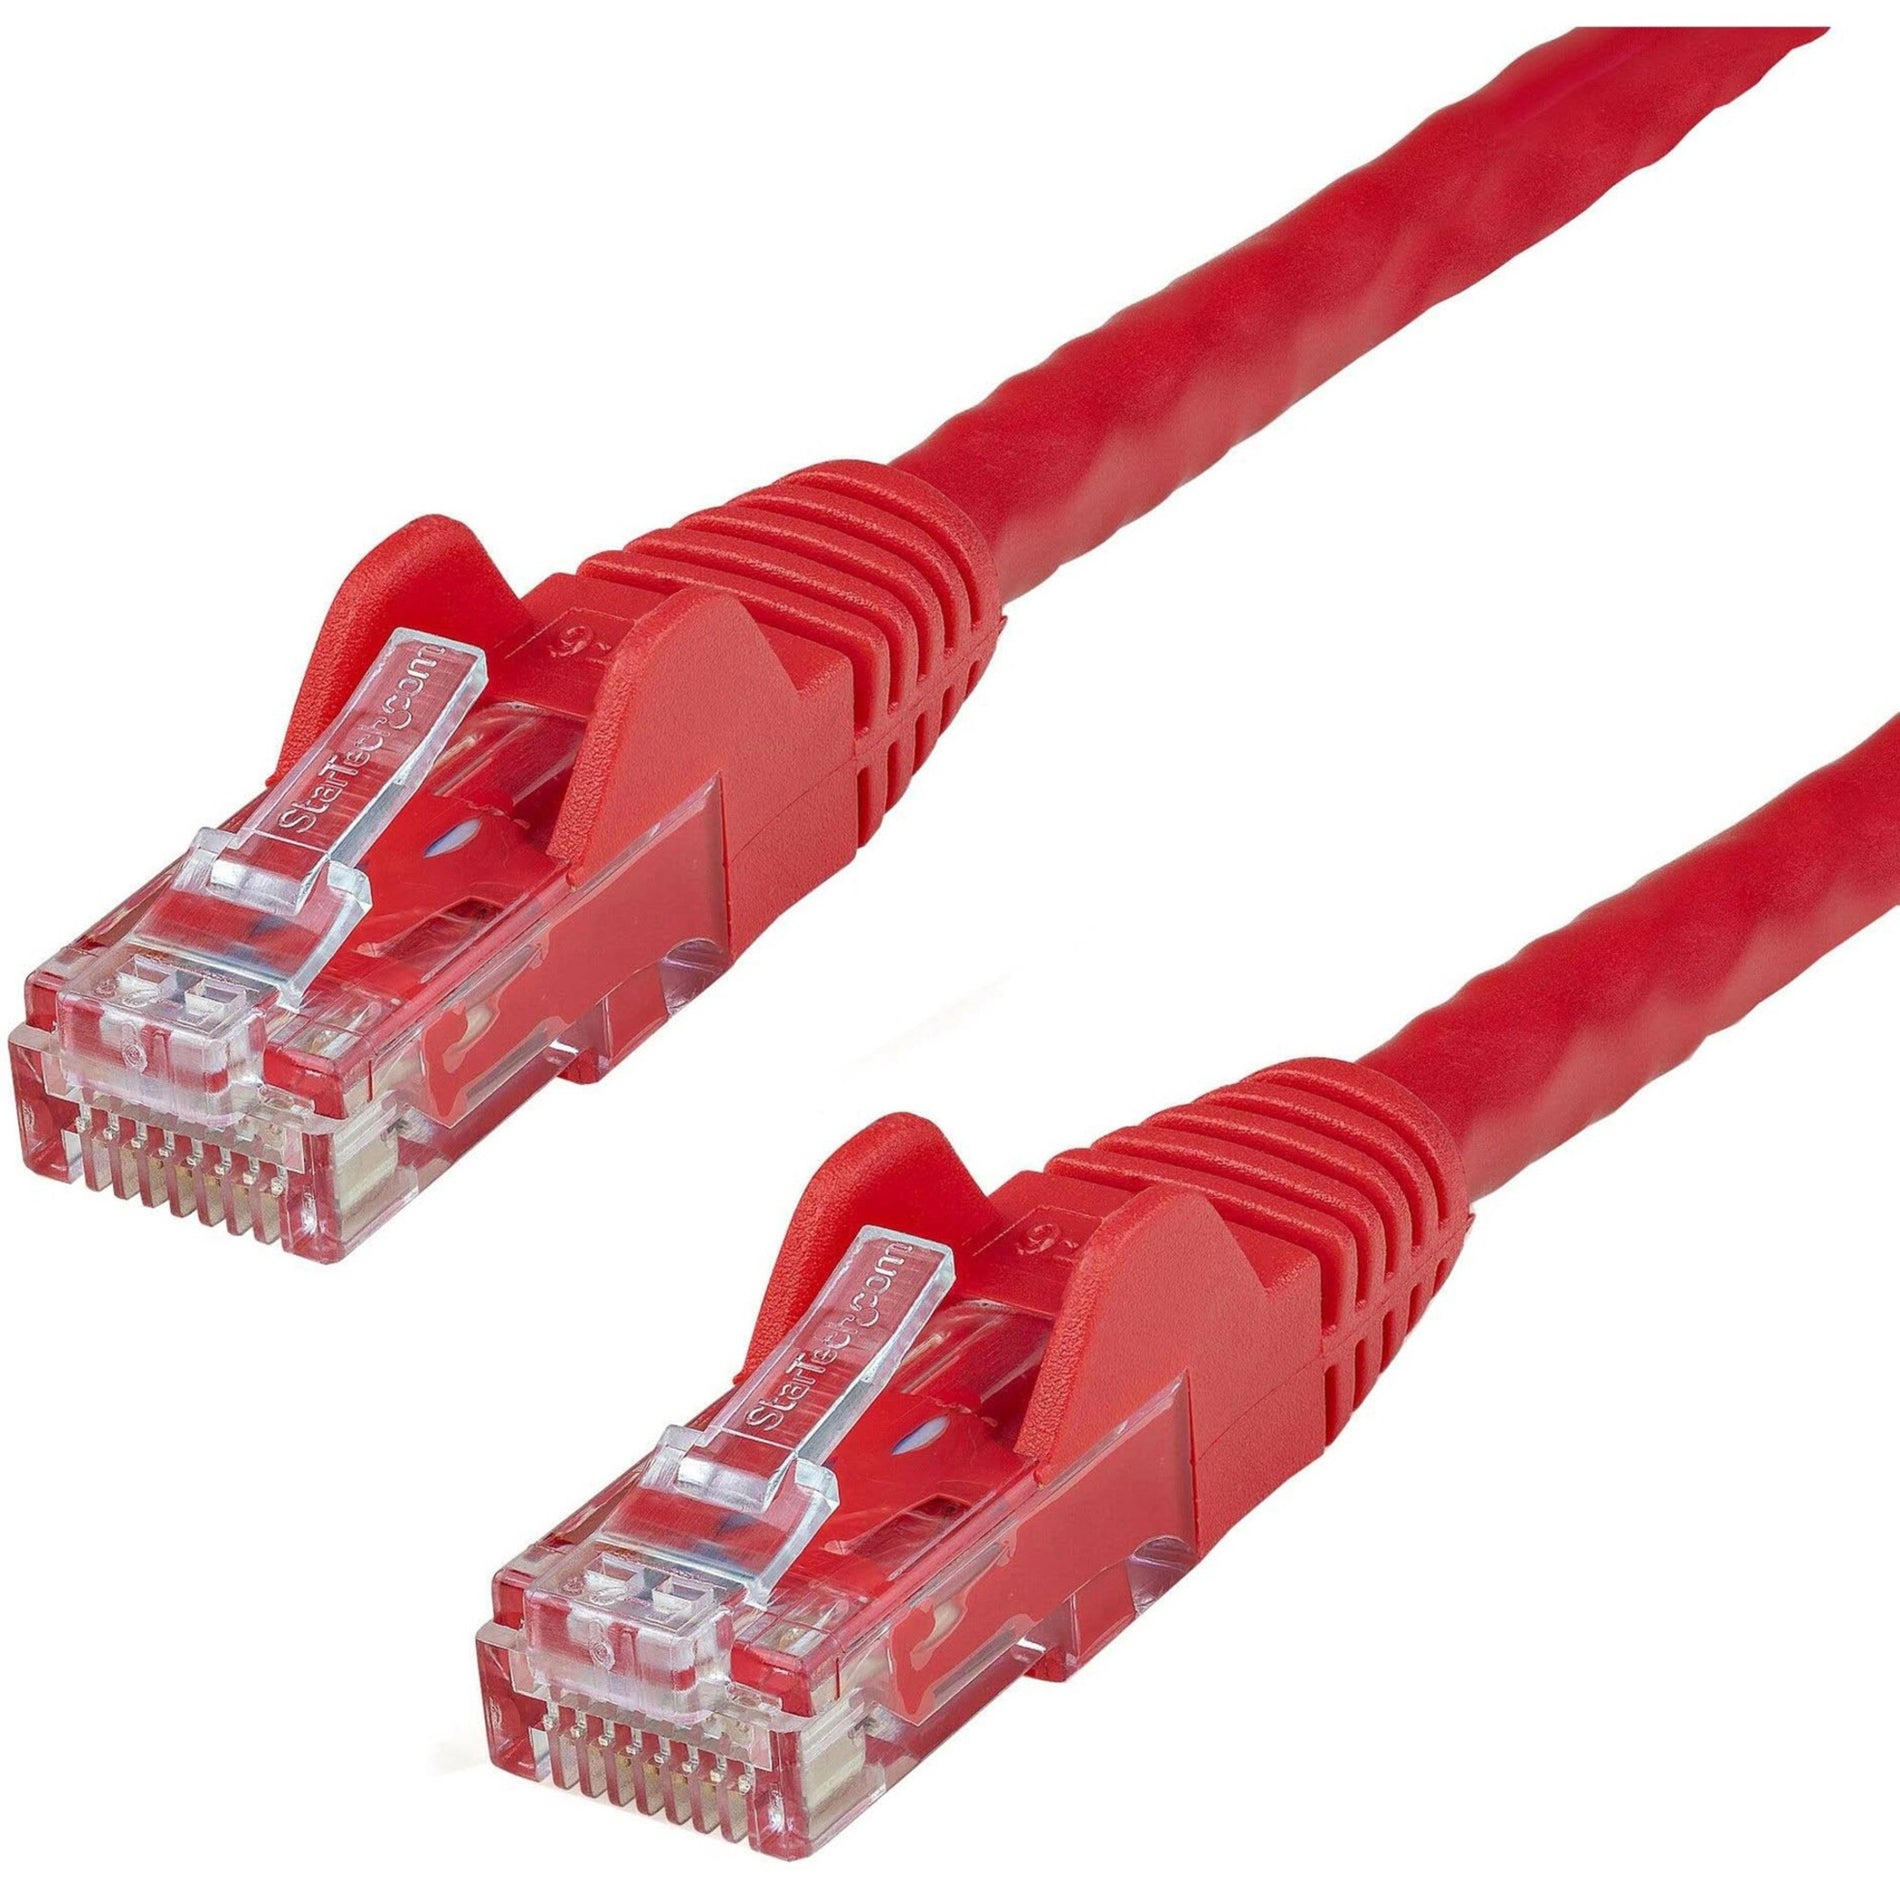 StarTech.com N6PATCH6RD Cat6 Patch Cable, 6 ft Red Ethernet Cable, Snagless RJ45 Connectors